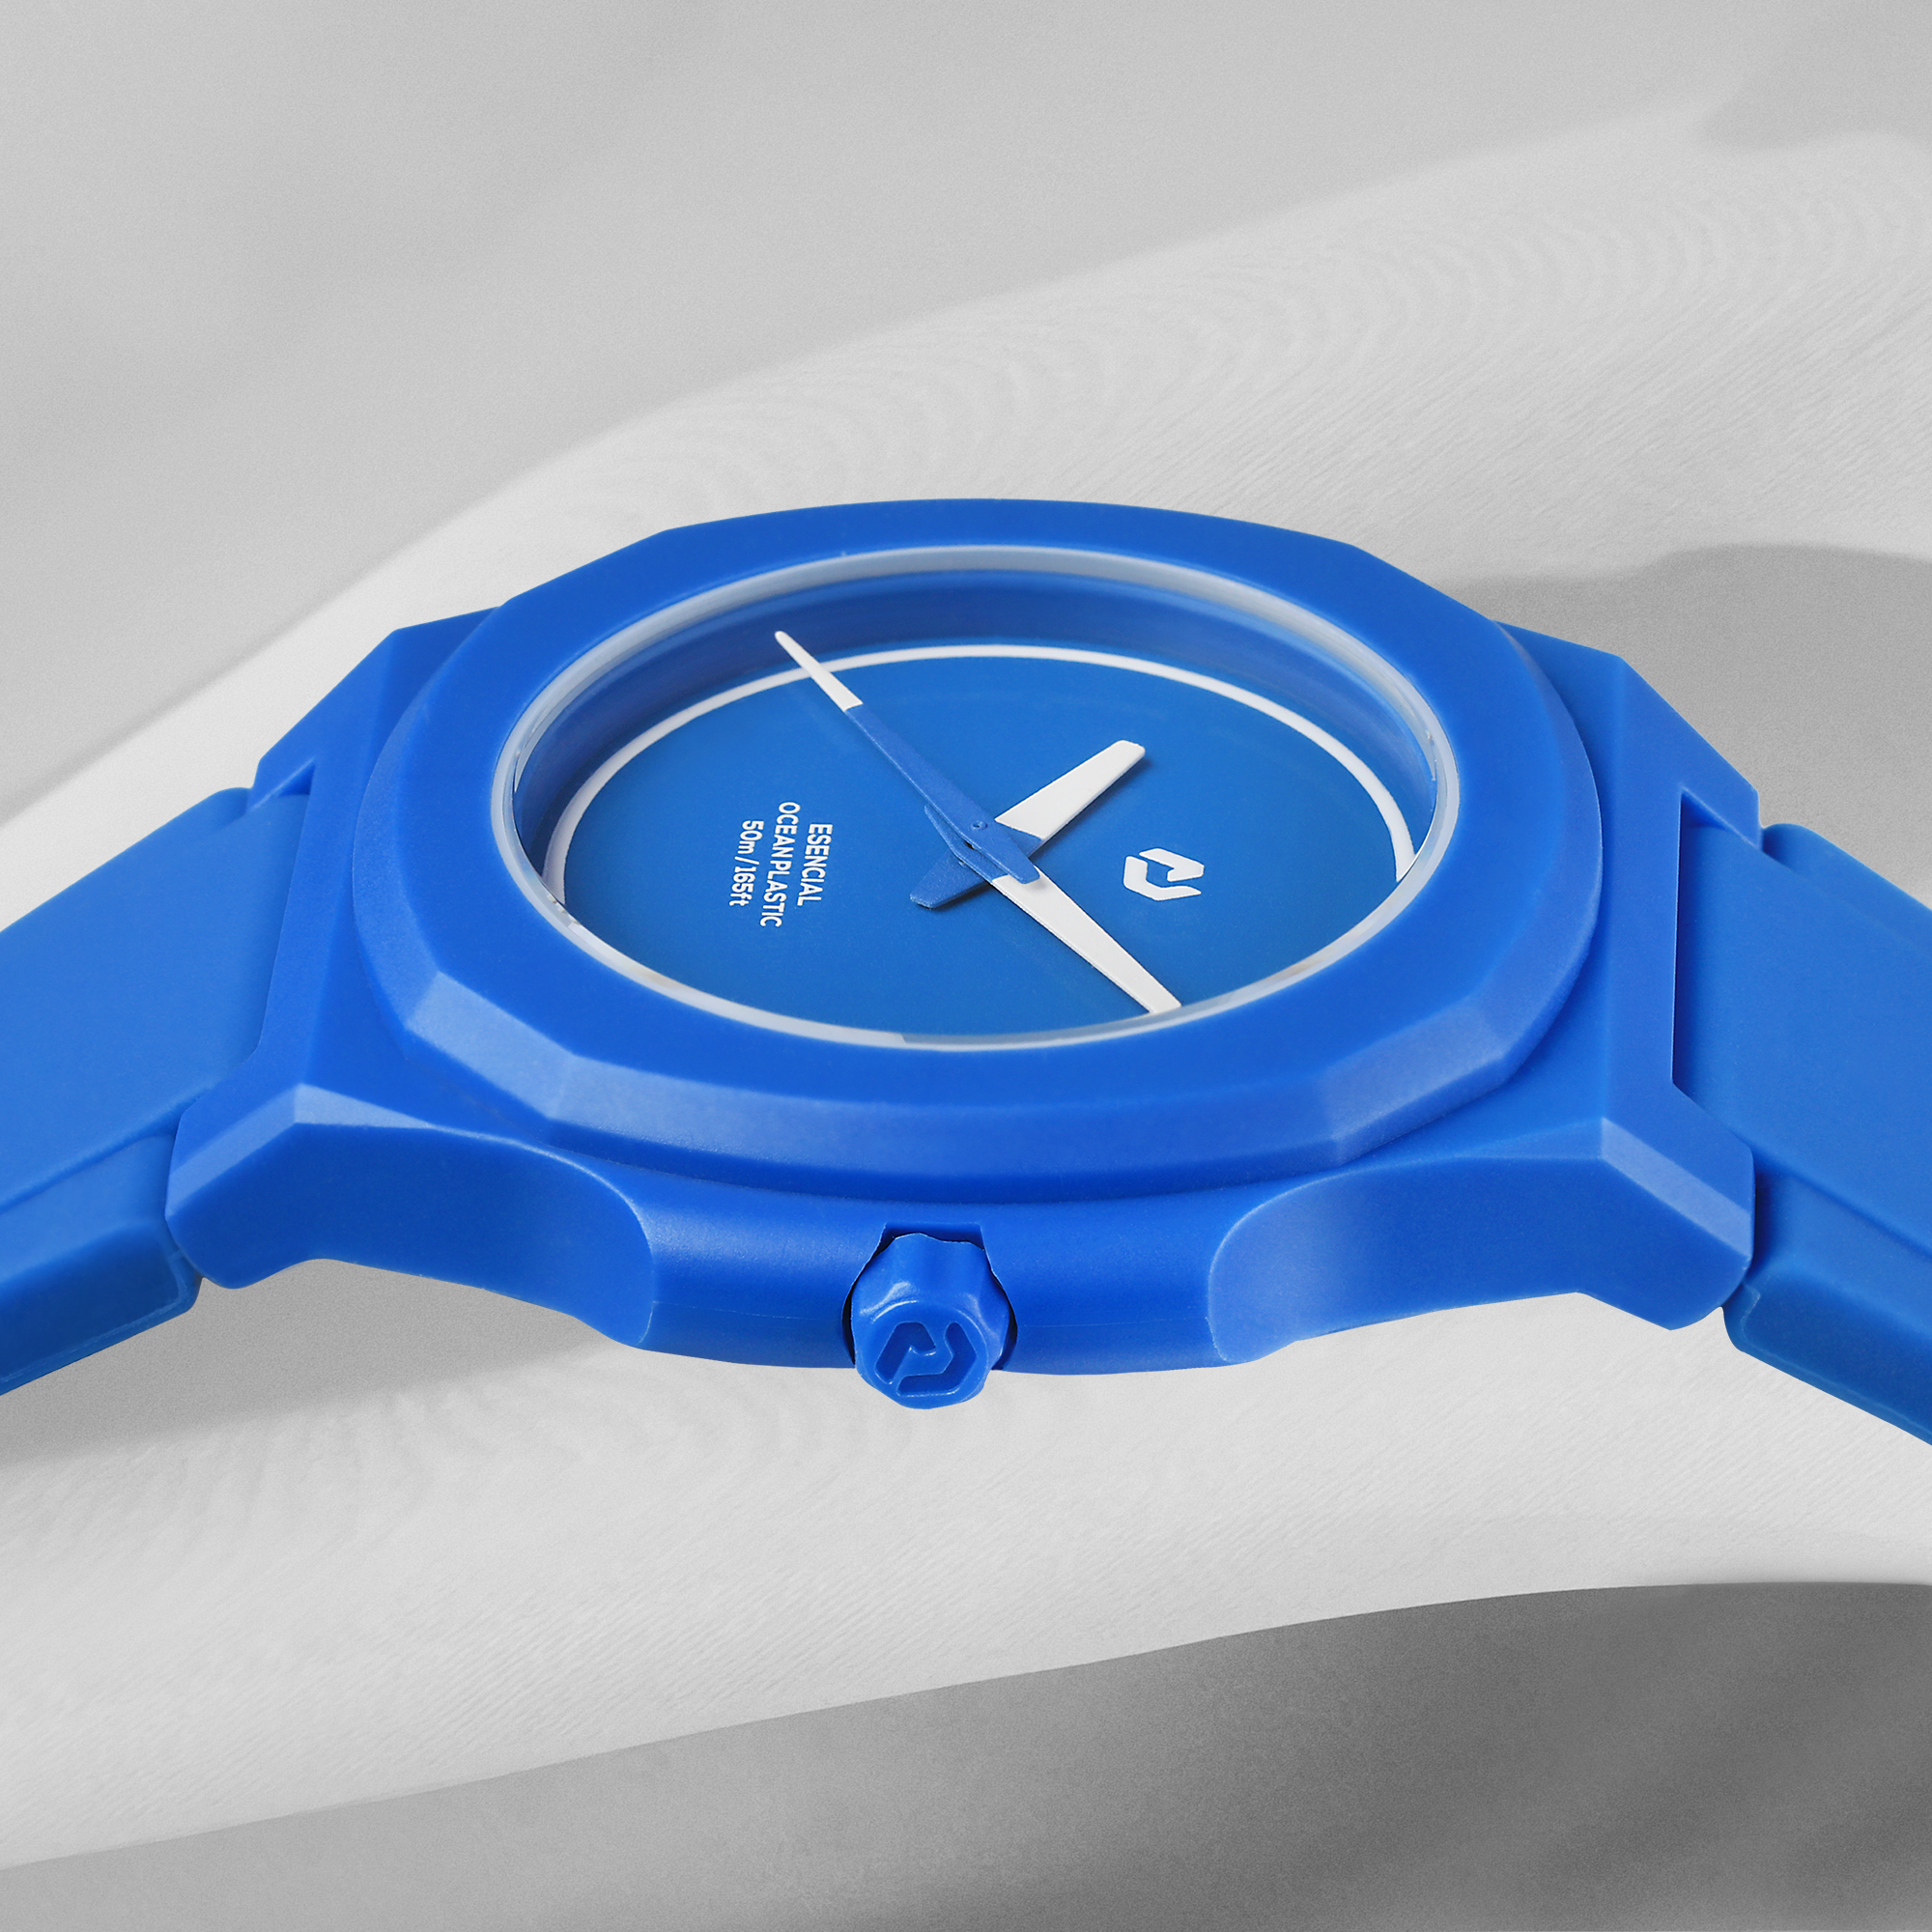 Catch of the Day: Nuun Official\'s Esencial Watch, Middle Eastern Timepiece  Made From Ocean Plastic | aBlogtoWatch